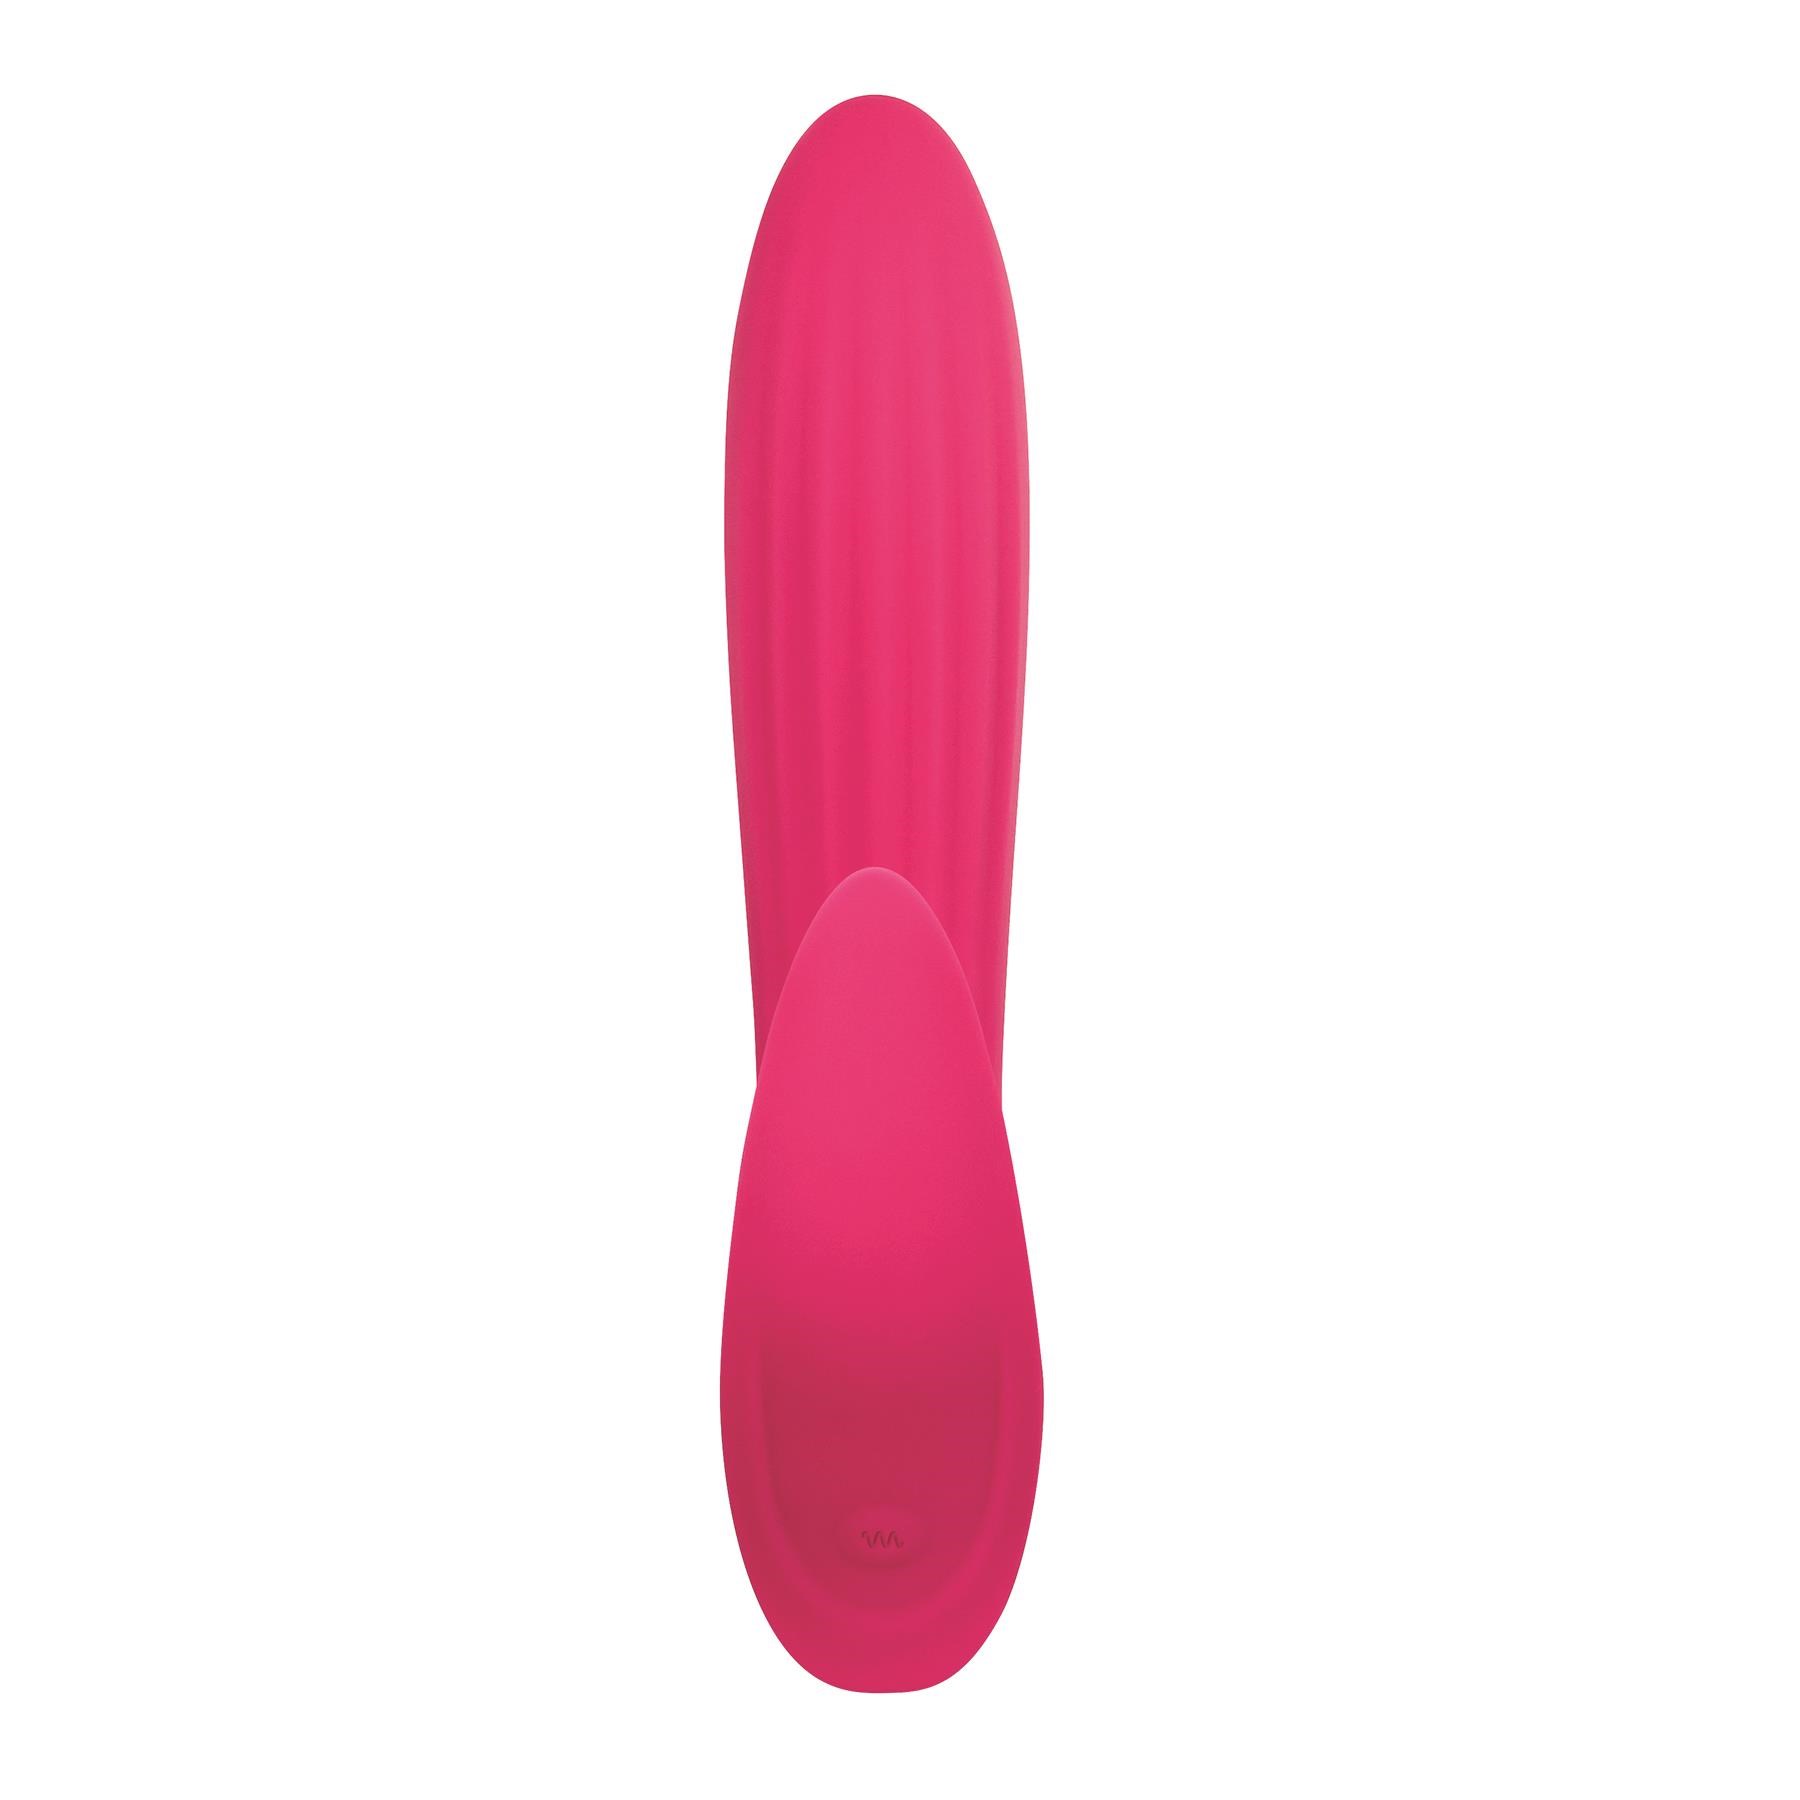 Eve's Bliss Vibrator Product Shot - Front